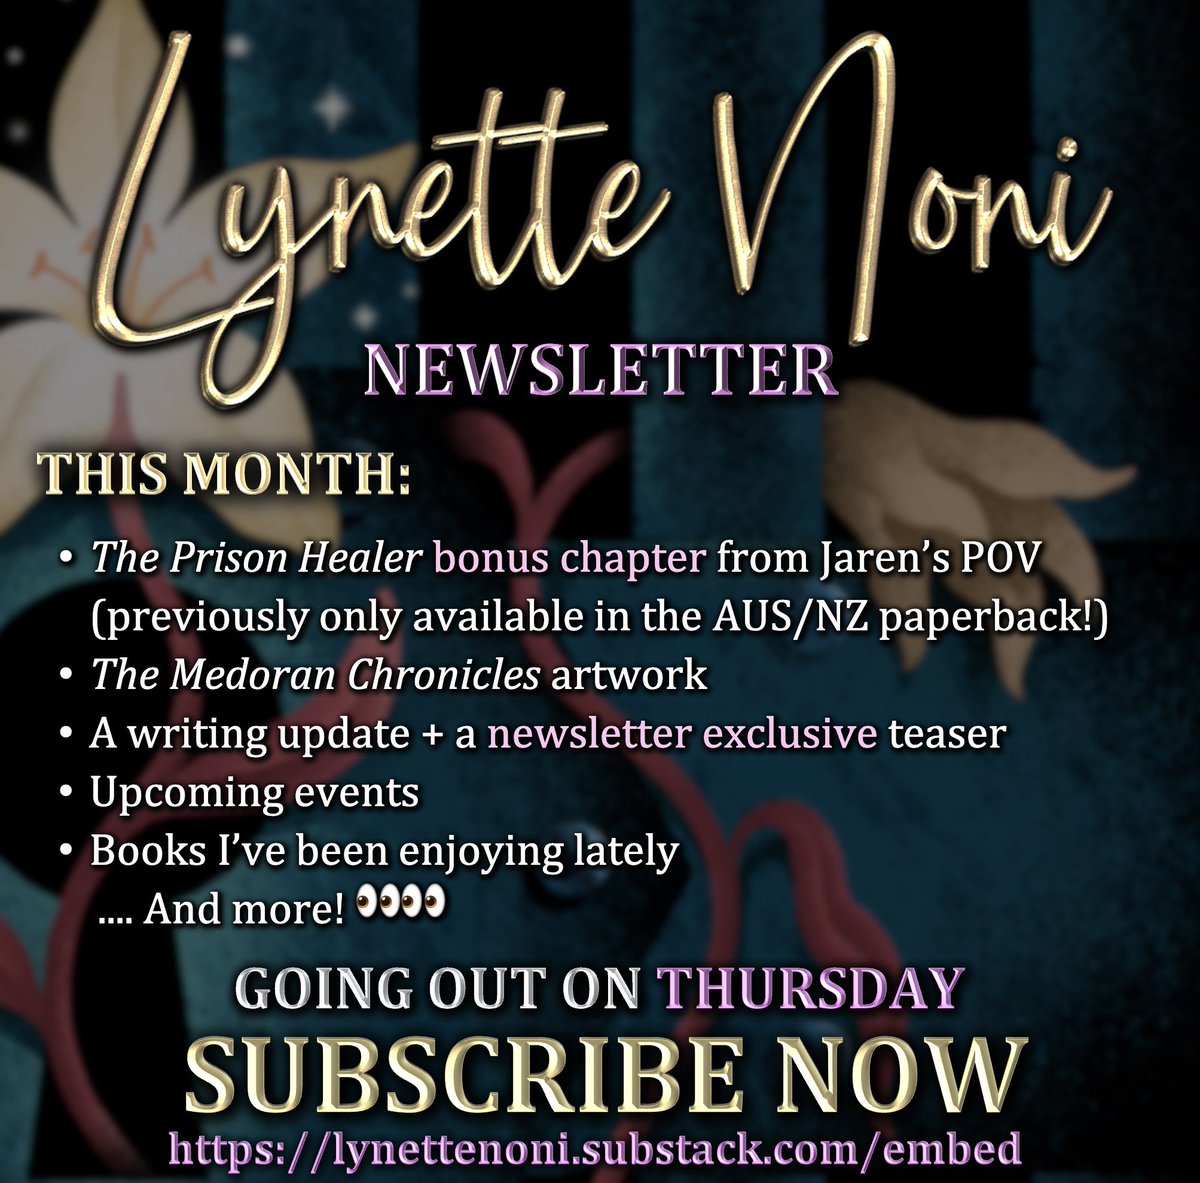 My next newsletter is going out THIS THURSDAY and it has sooooo much fun stuff in it (including Jaren’s bonus chapter from #ThePrisonHealer!!) so make sure you sign up in time to keep from missing out! Subscribe here: lynettenoni.substack.com/embed